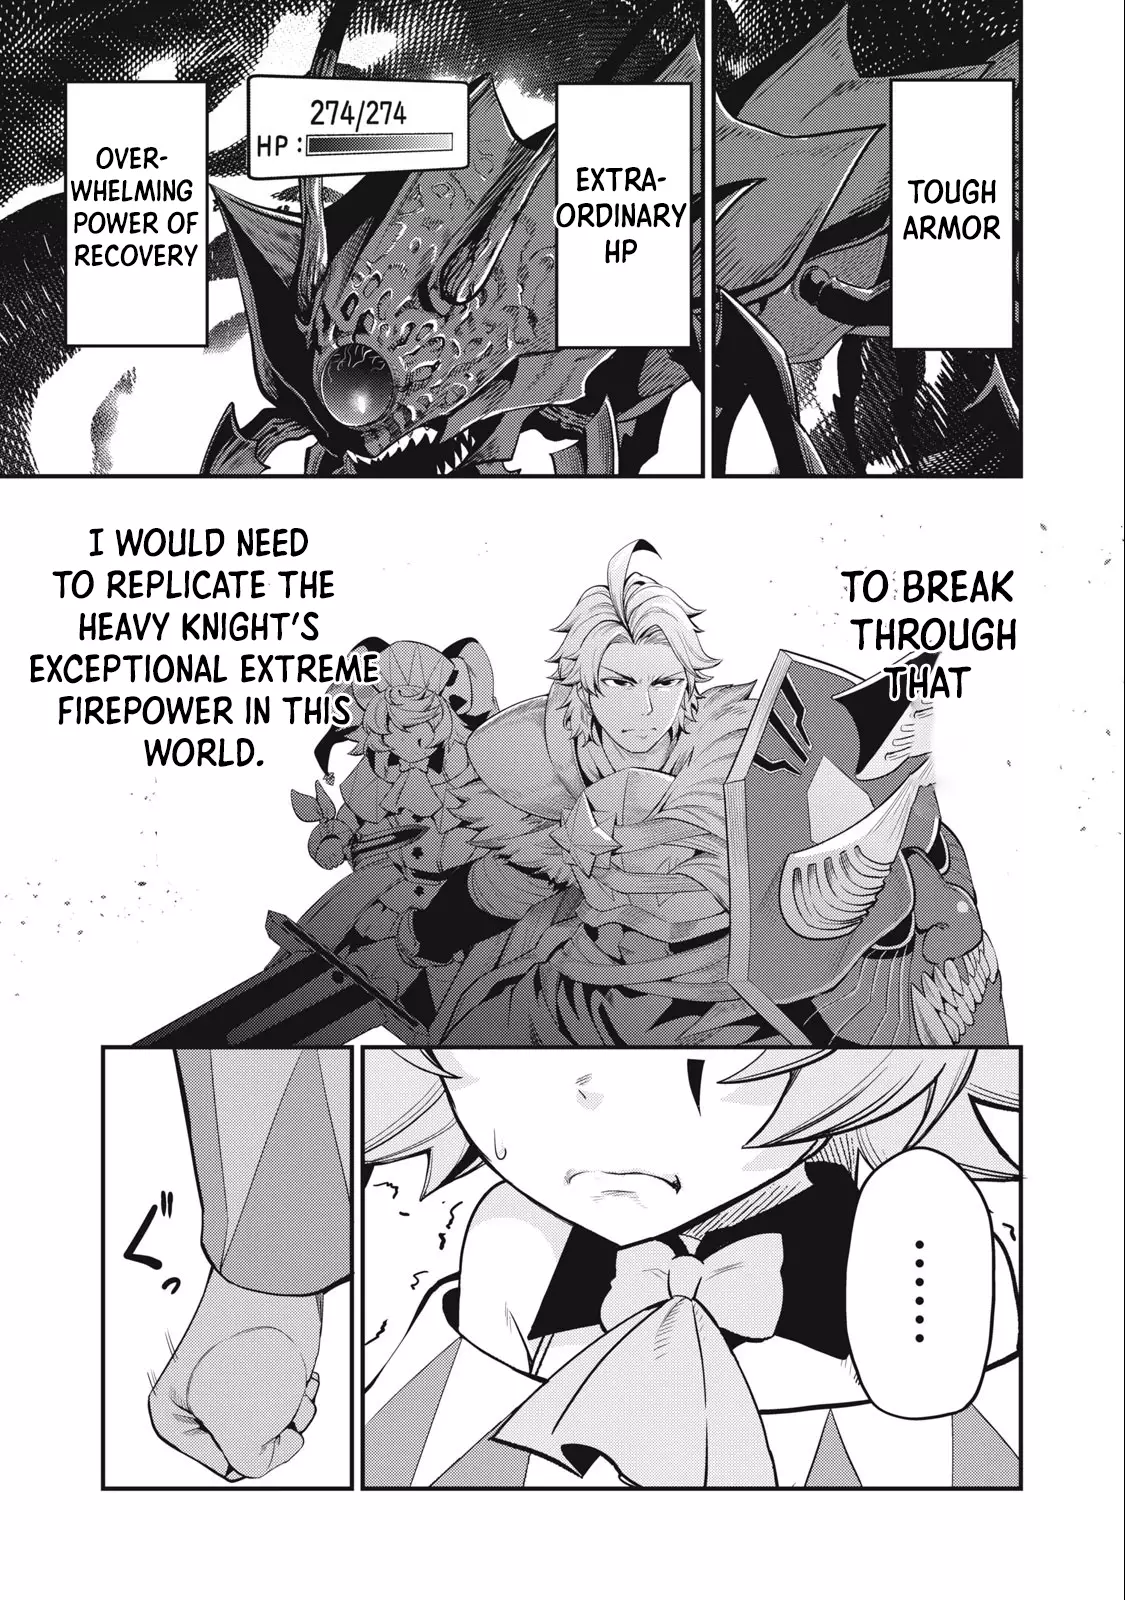 The Exiled Reincarnated Heavy Knight Is Unrivaled In Game Knowledge - 38 page 2-10b919f0